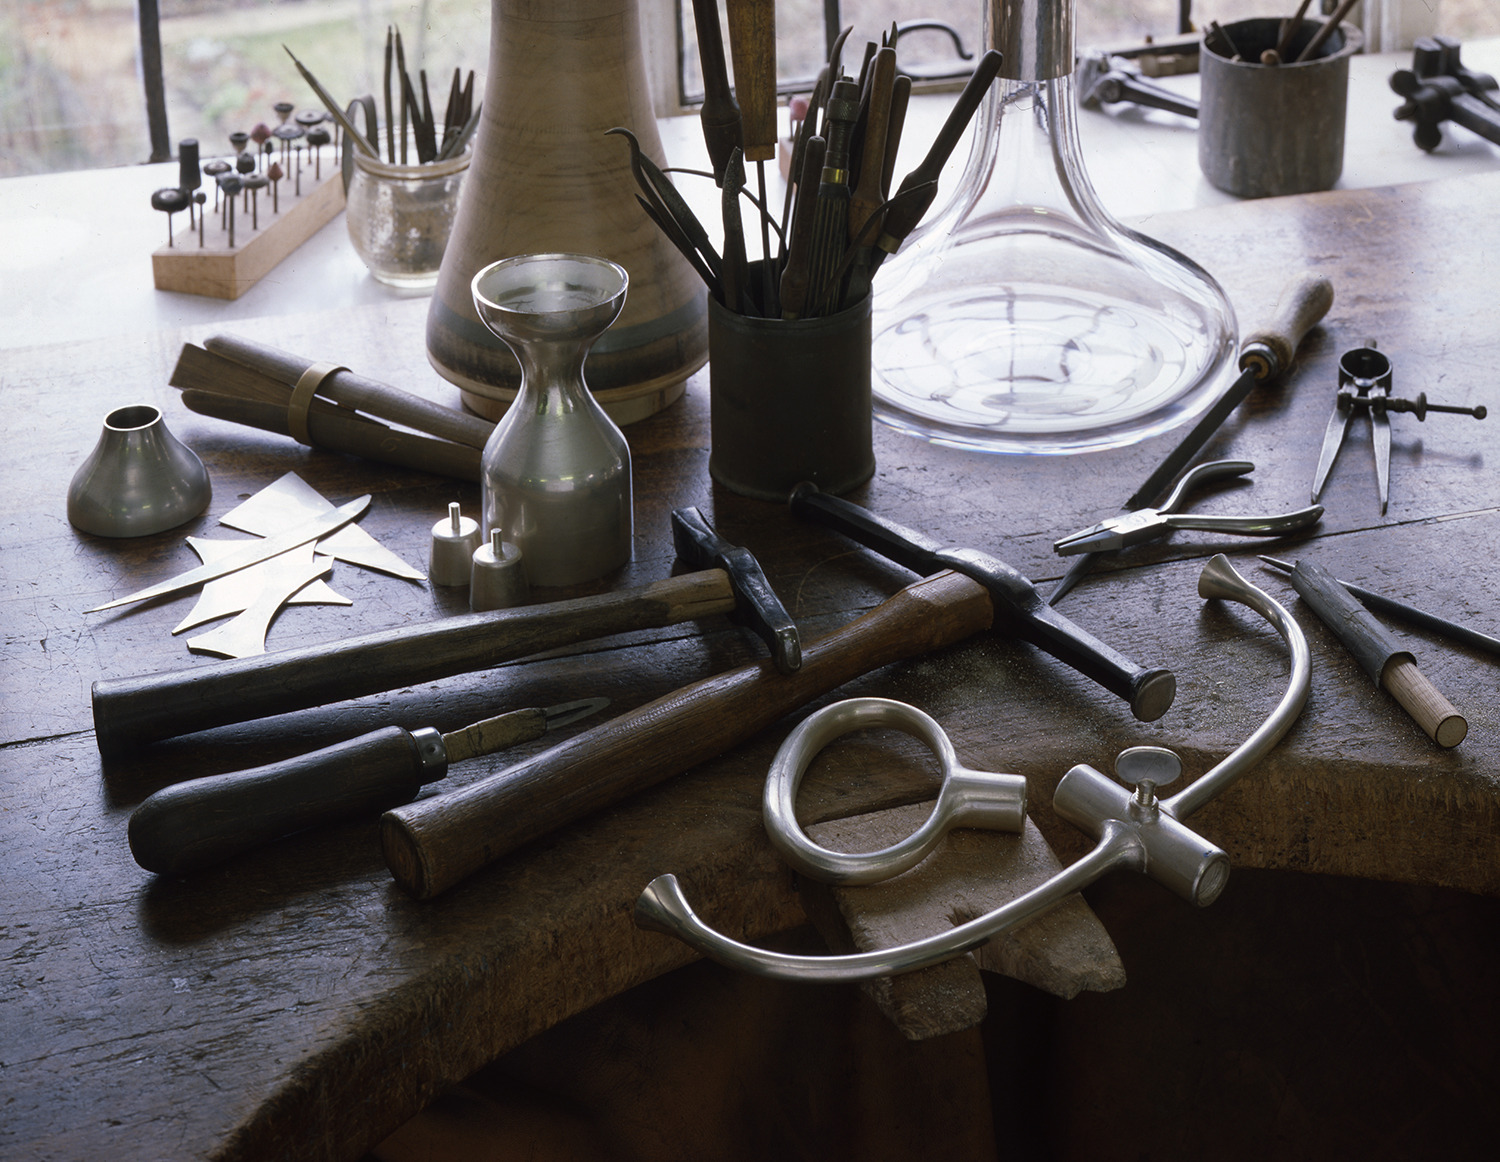 Robert Welch's silversmithing workbench, photographed in the 1970s